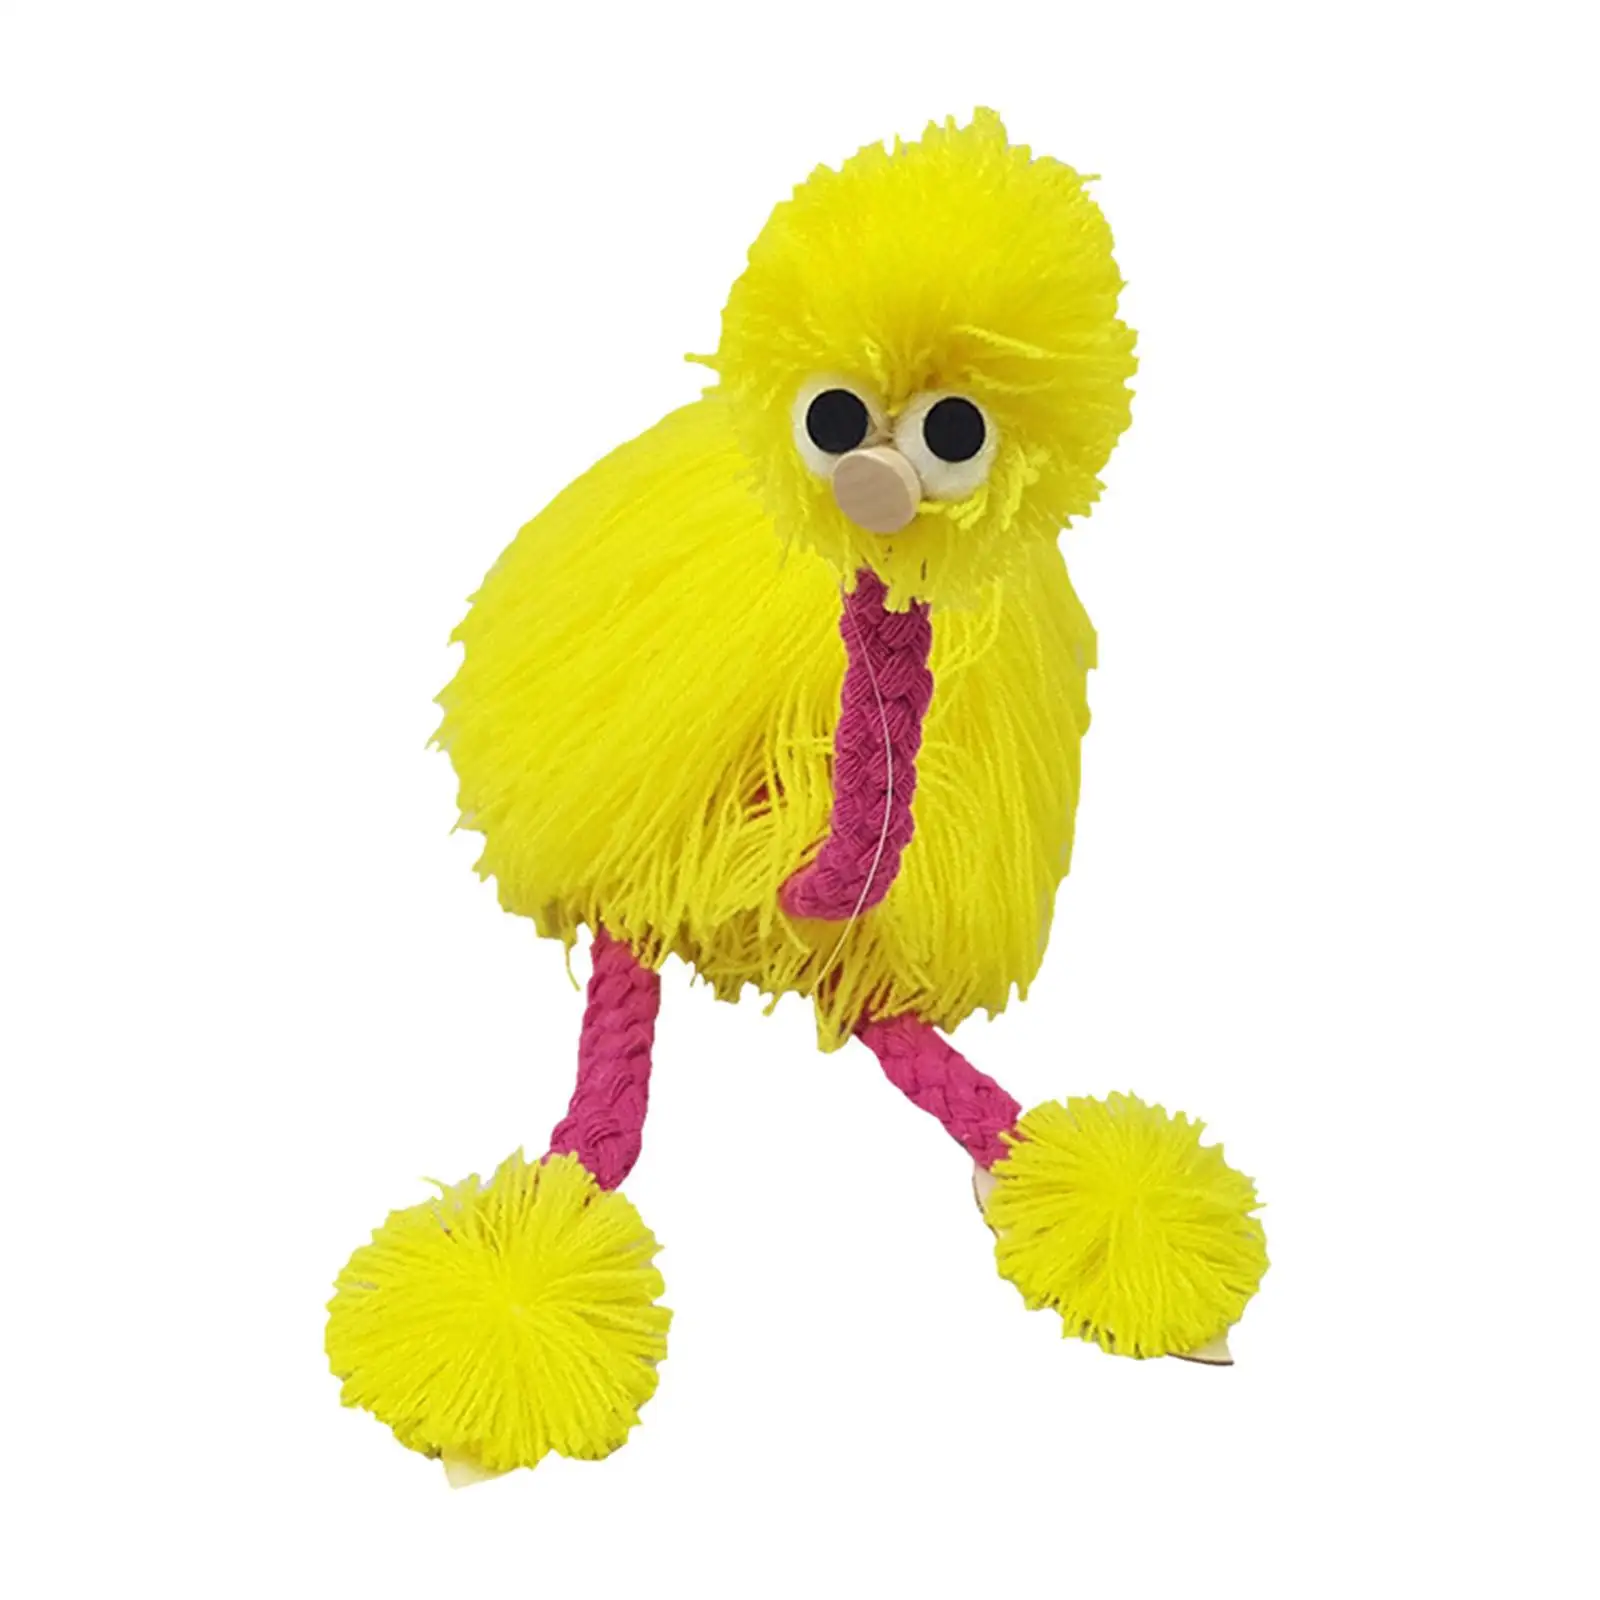 Cute Marionettes String Puppet Lovely Bird Animal Toy for Holiday Stage Performance Kids Gift Birthday ages 3 Years Old